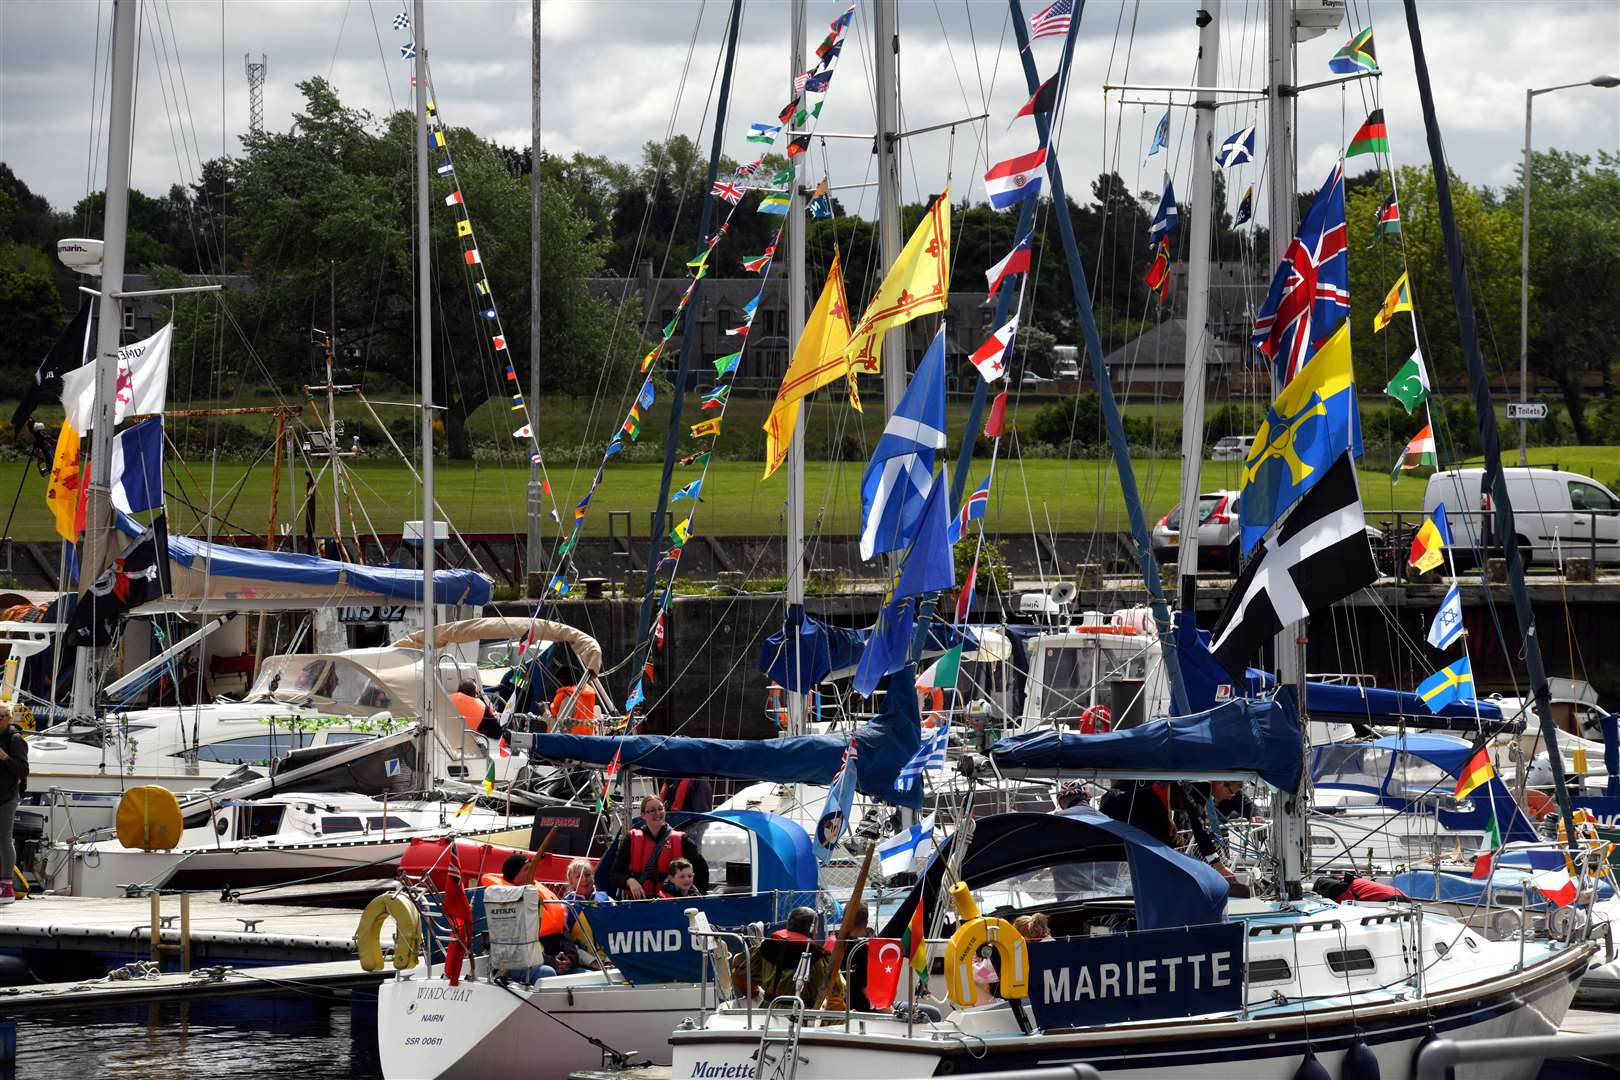 Vessels decked with flags in Nairn Harbour.